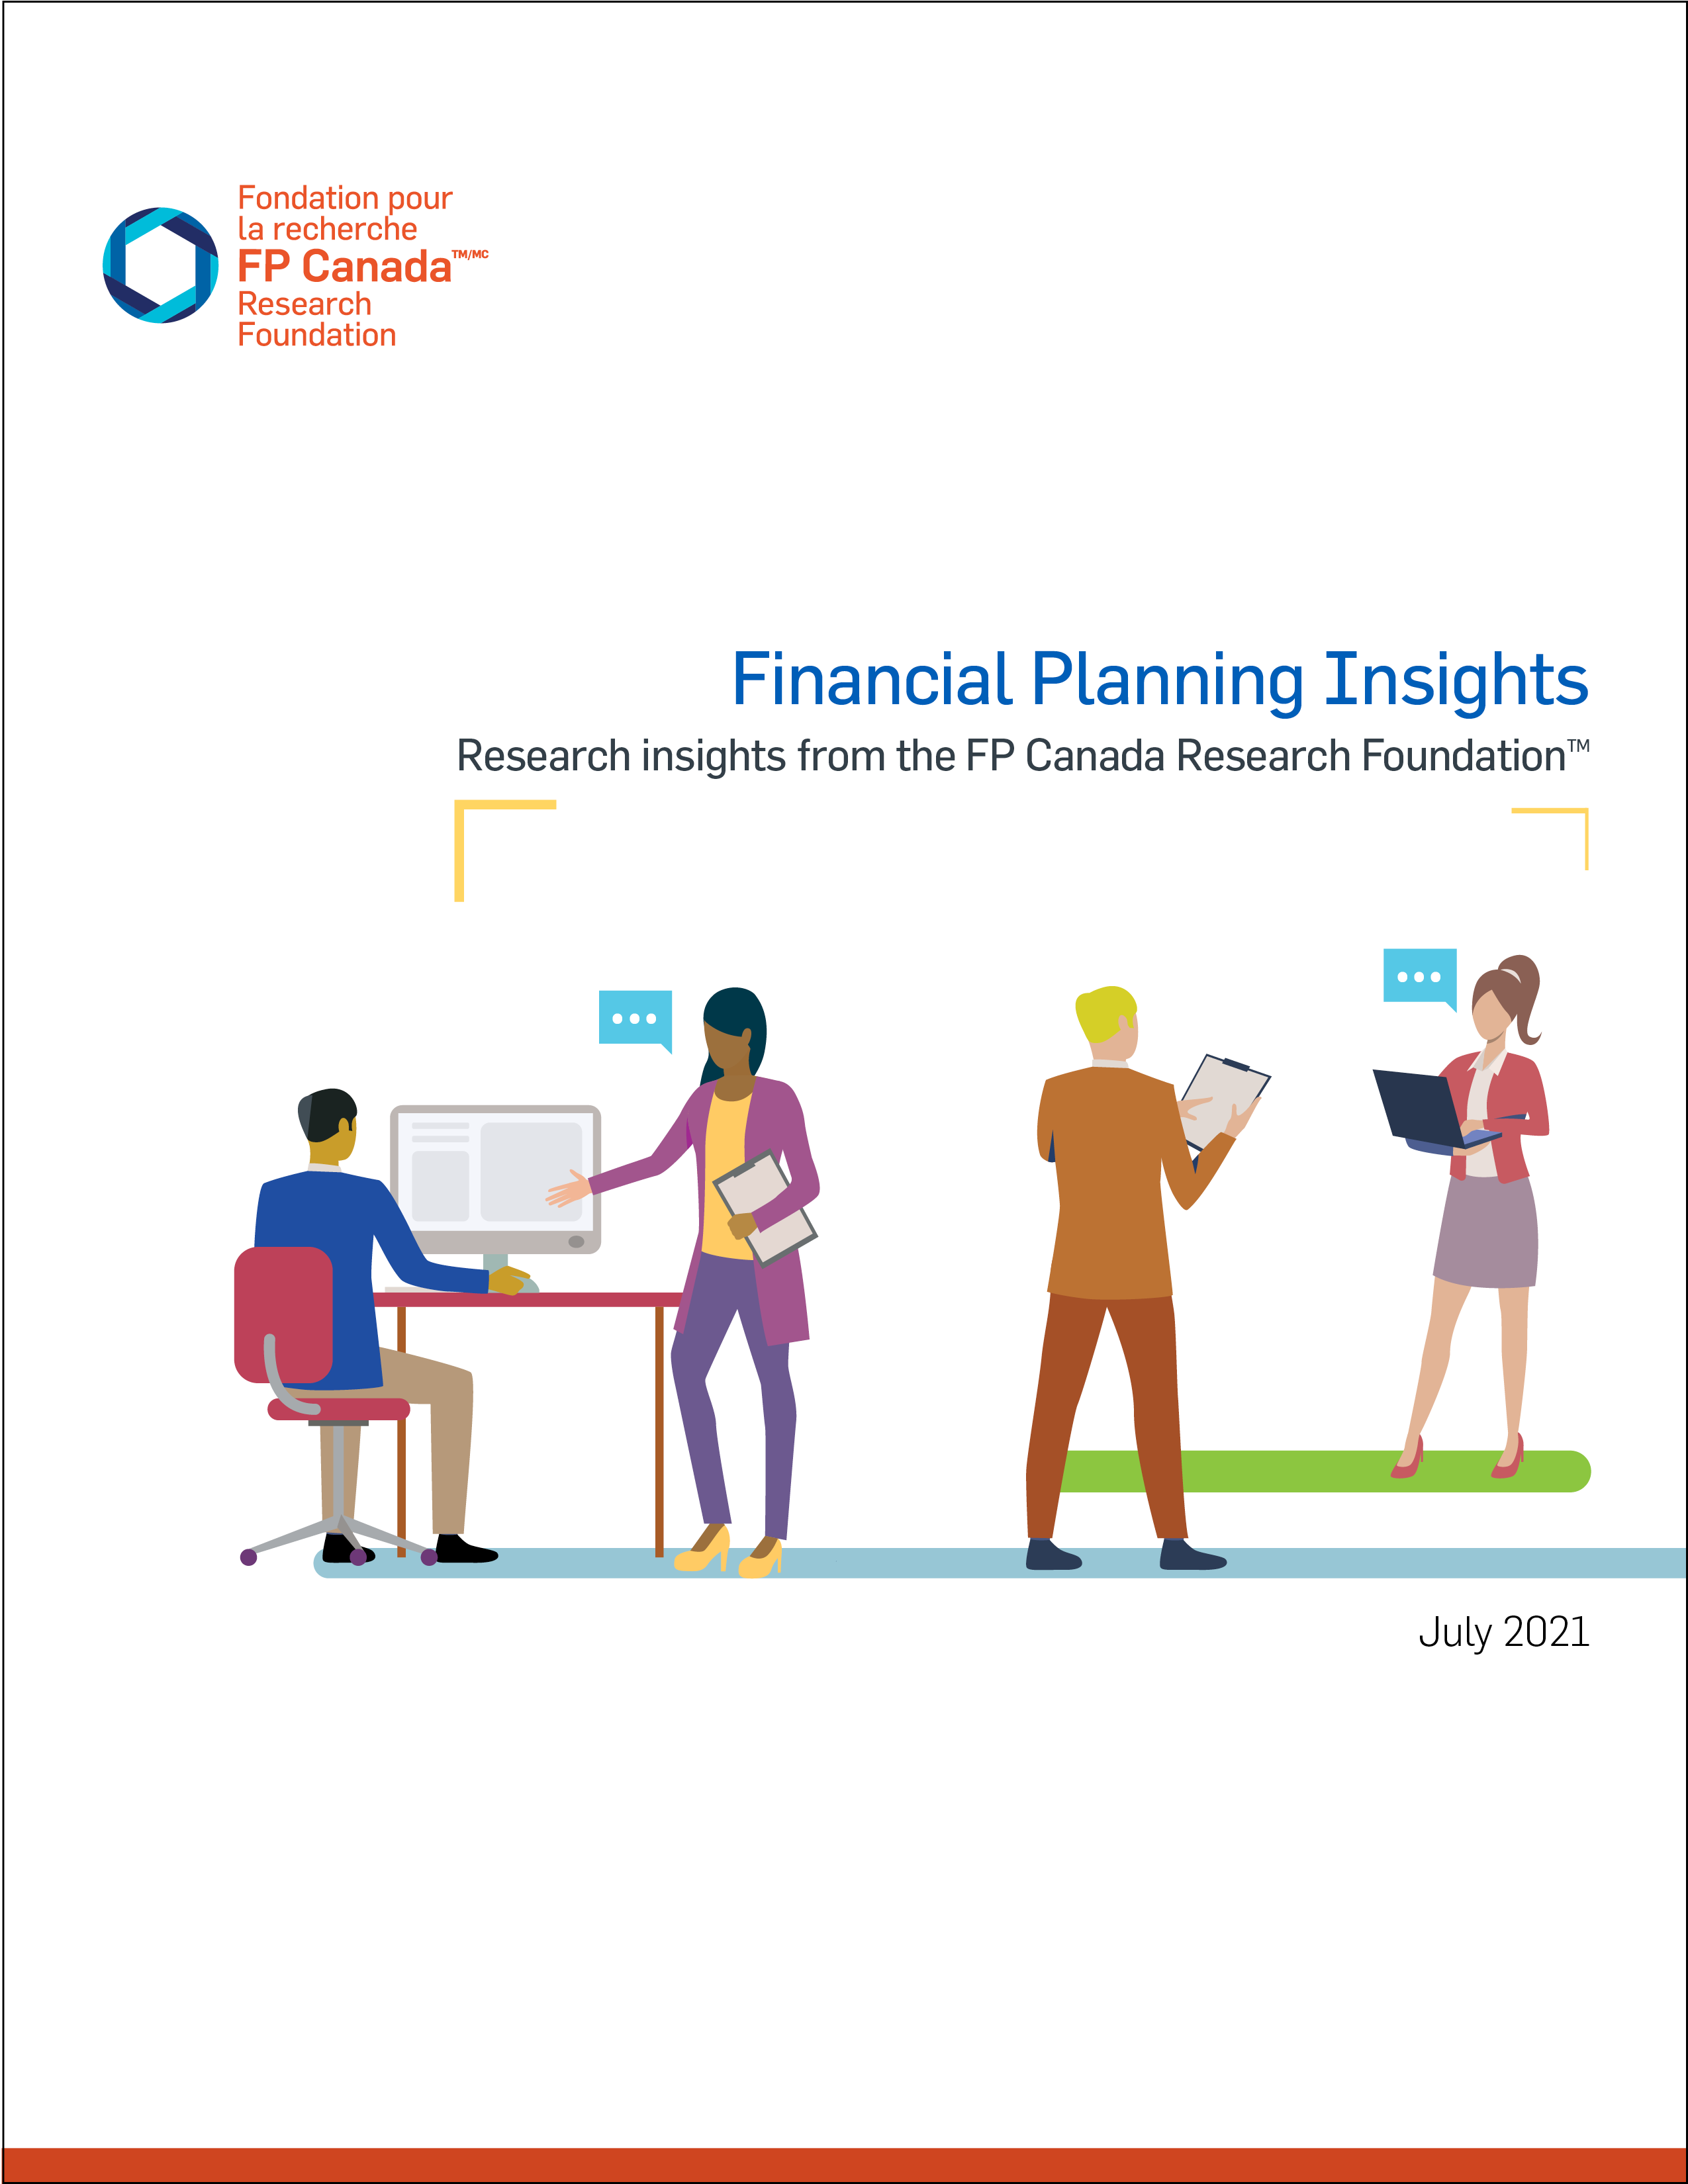 Research Insights from FP Canada Research Foundation